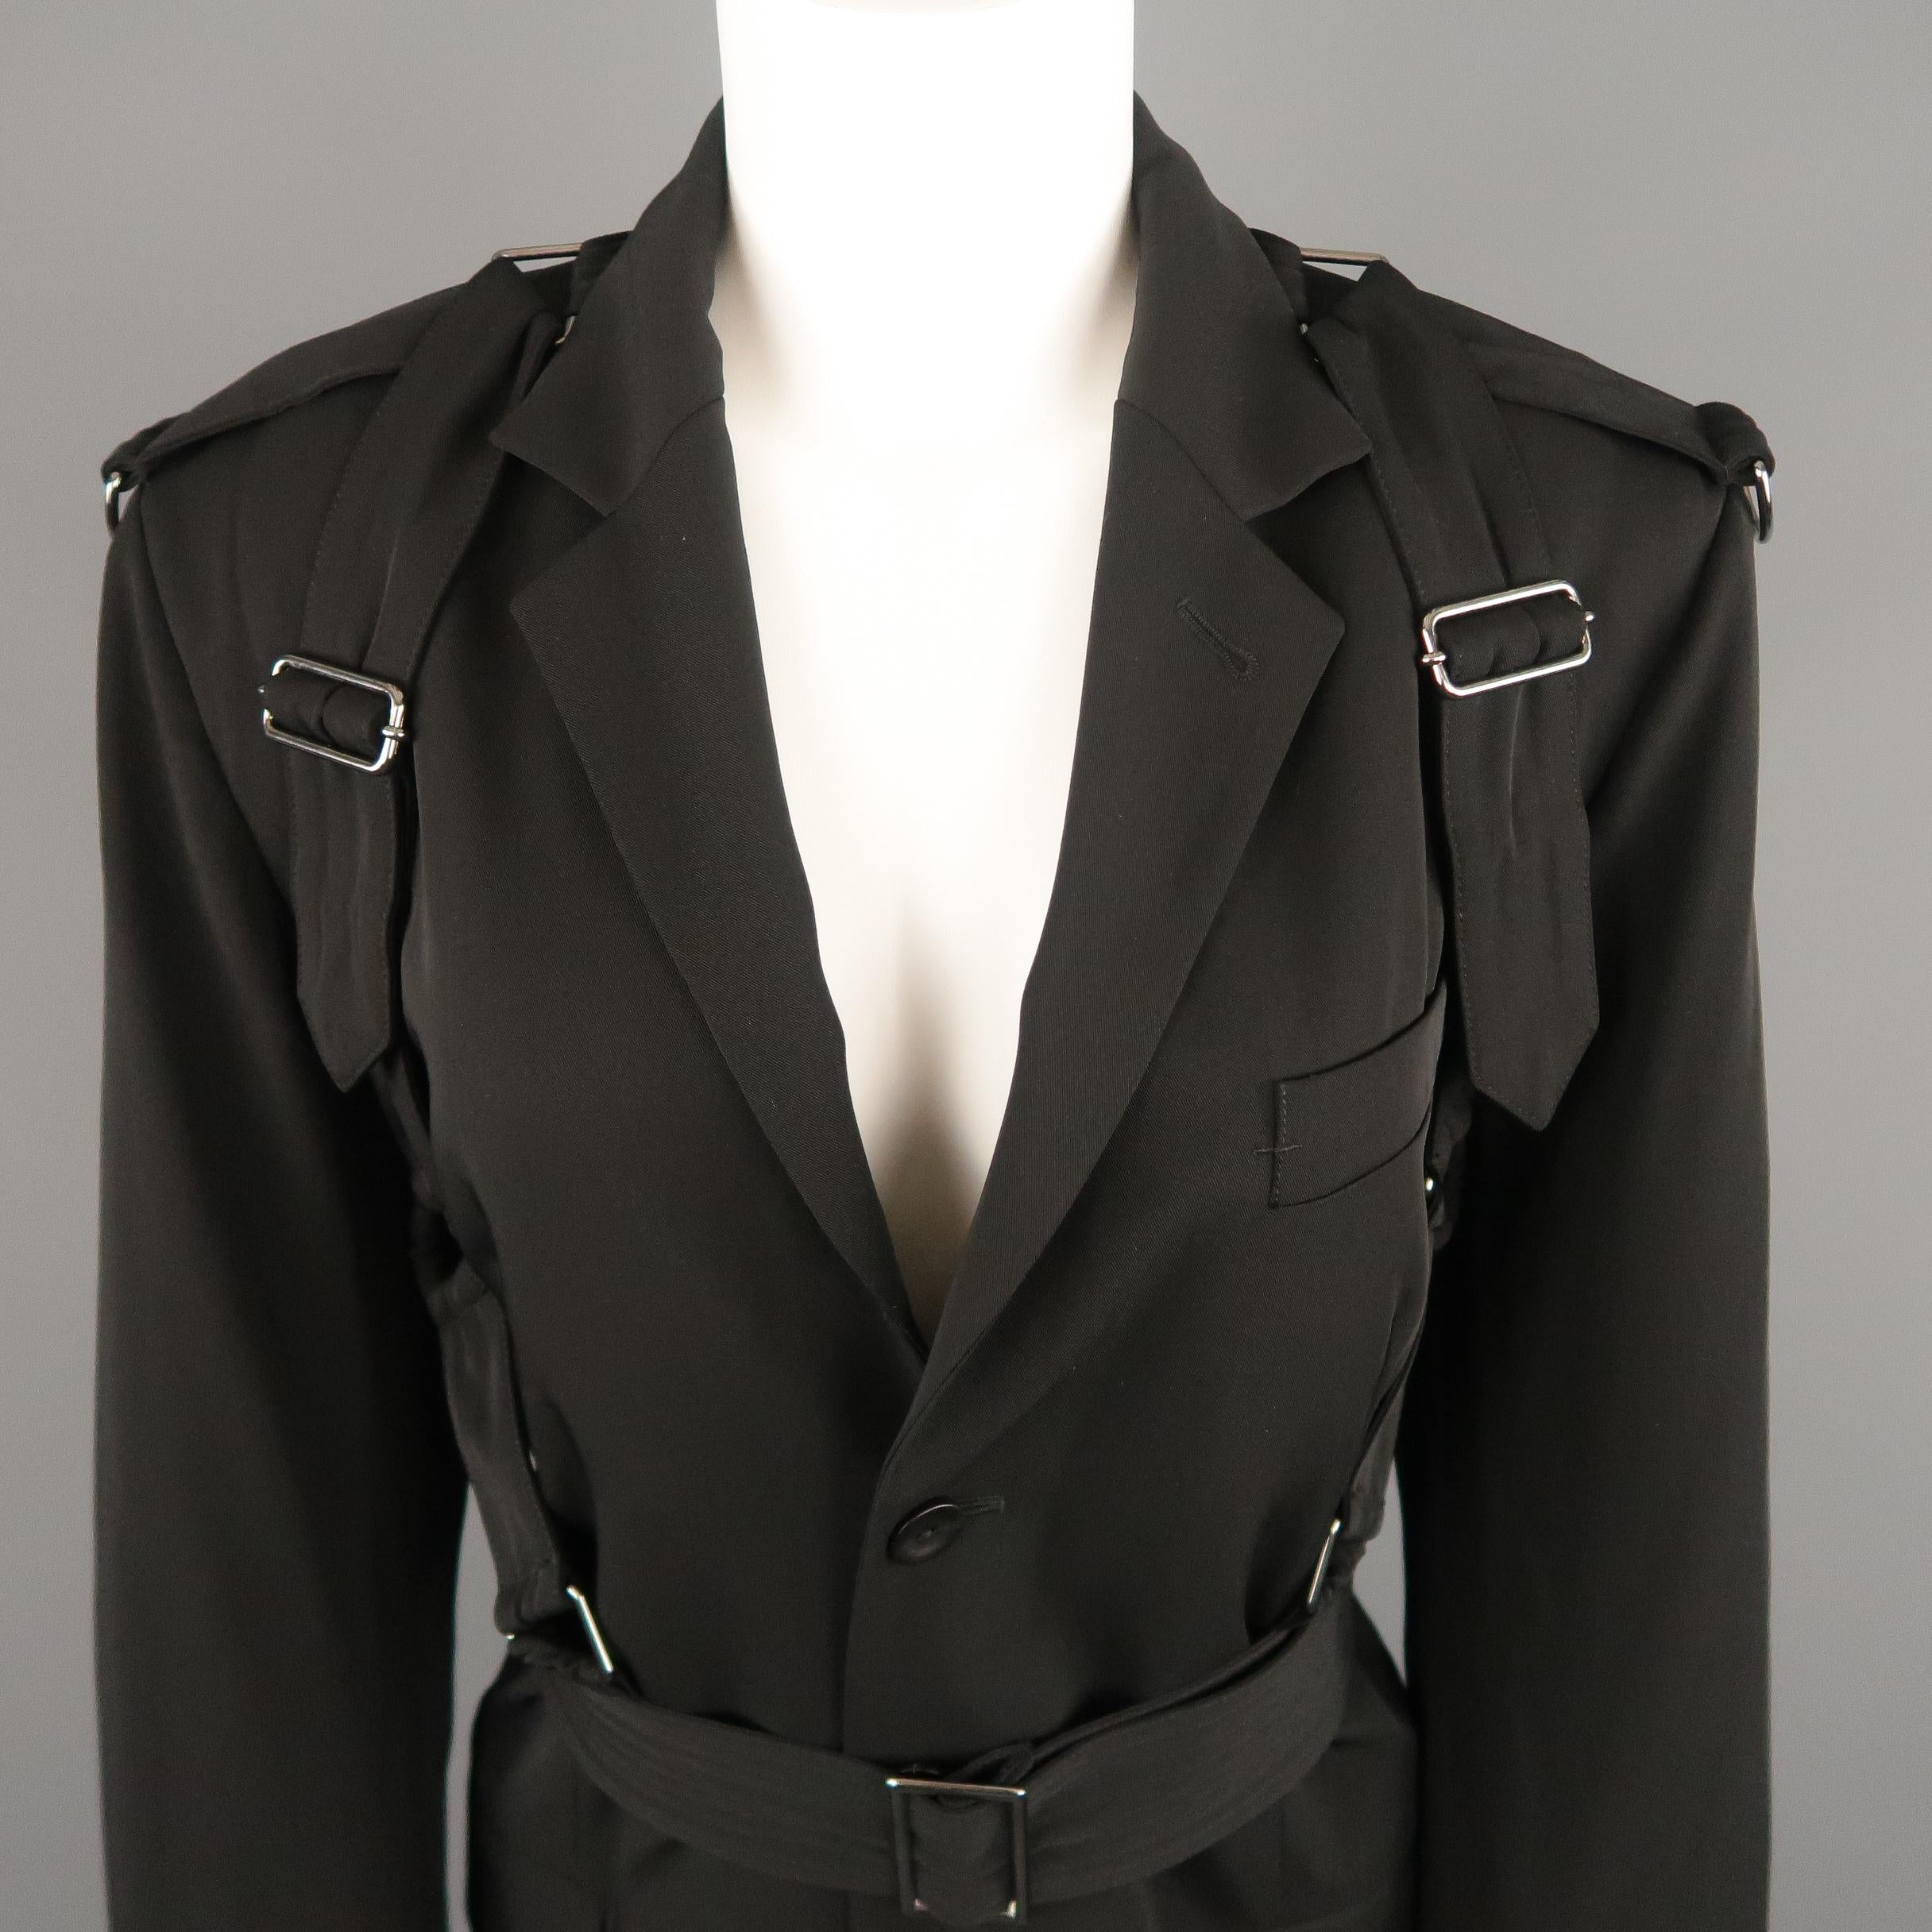 Vintage GAULTIER2 by JEAN PAUL GAULTIER blazer jacket comes in black wool twill with a notch lapel,single breasted, three button front, functional button cuffs, and bondage strap harness overlay. Made in Italy.
 
Excellent Pre-Owned